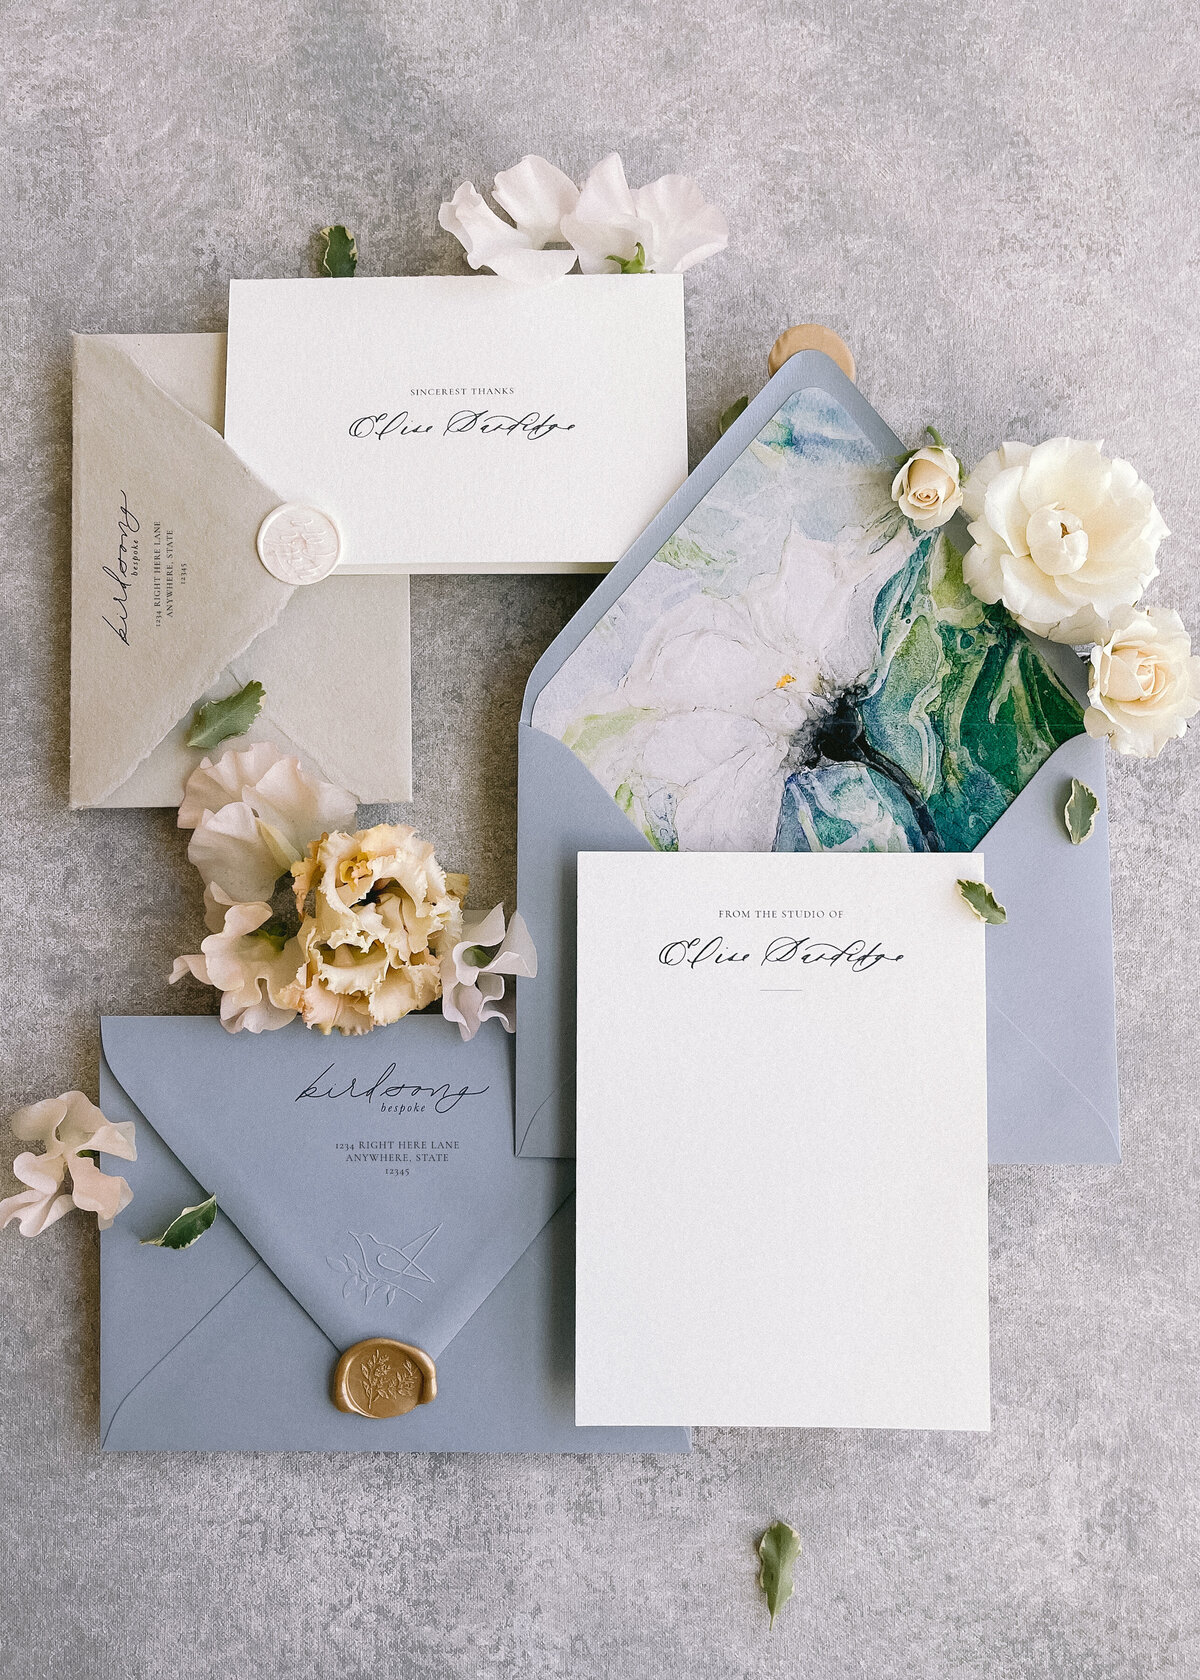 Custom business stationery including handwritten calligraphy and a watercolor envelope liner